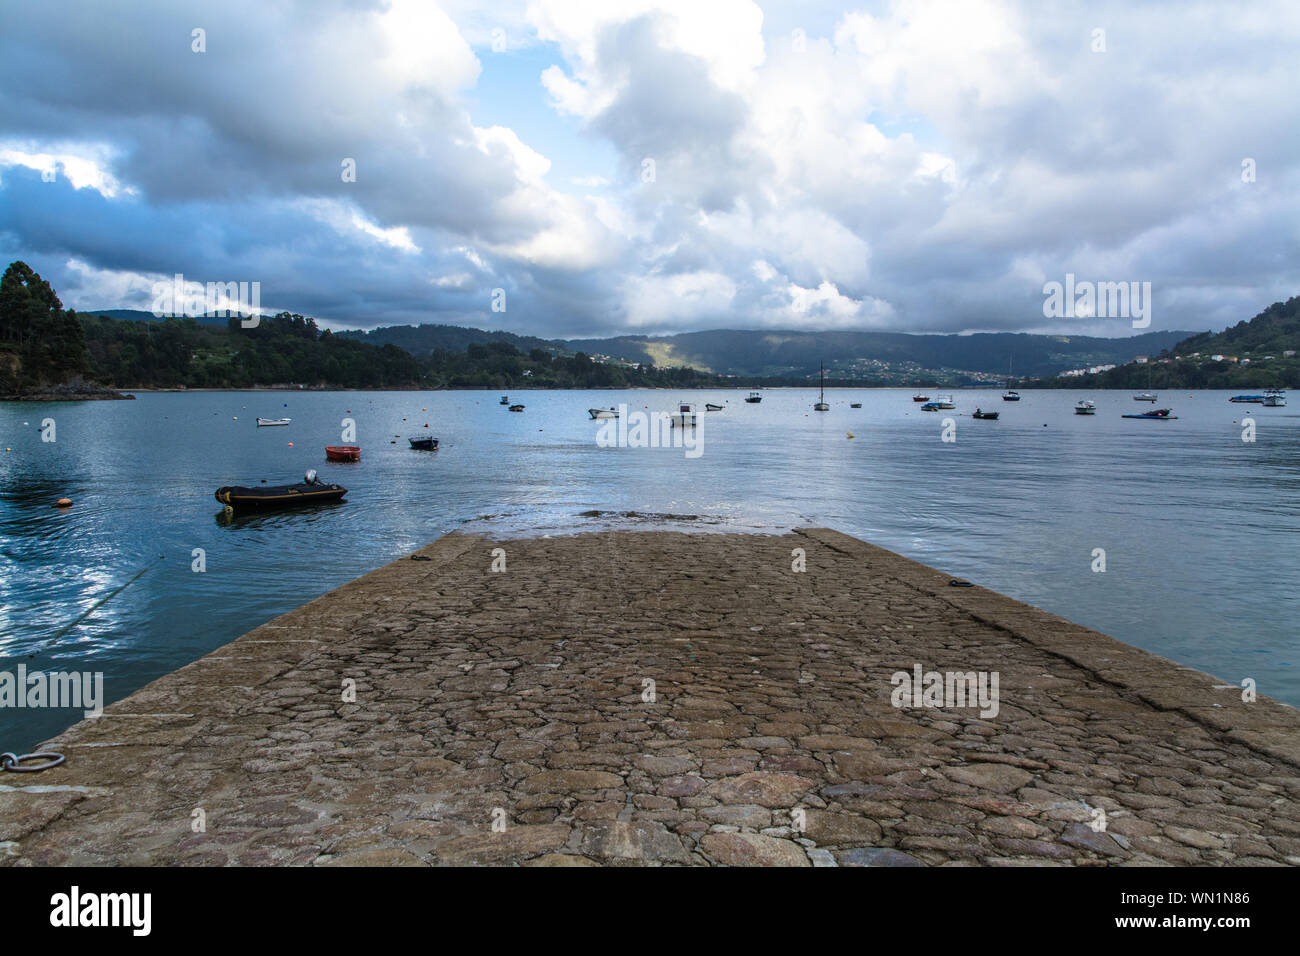 Boat Ramp On Sea Against Cloudy Sky Stock Photo